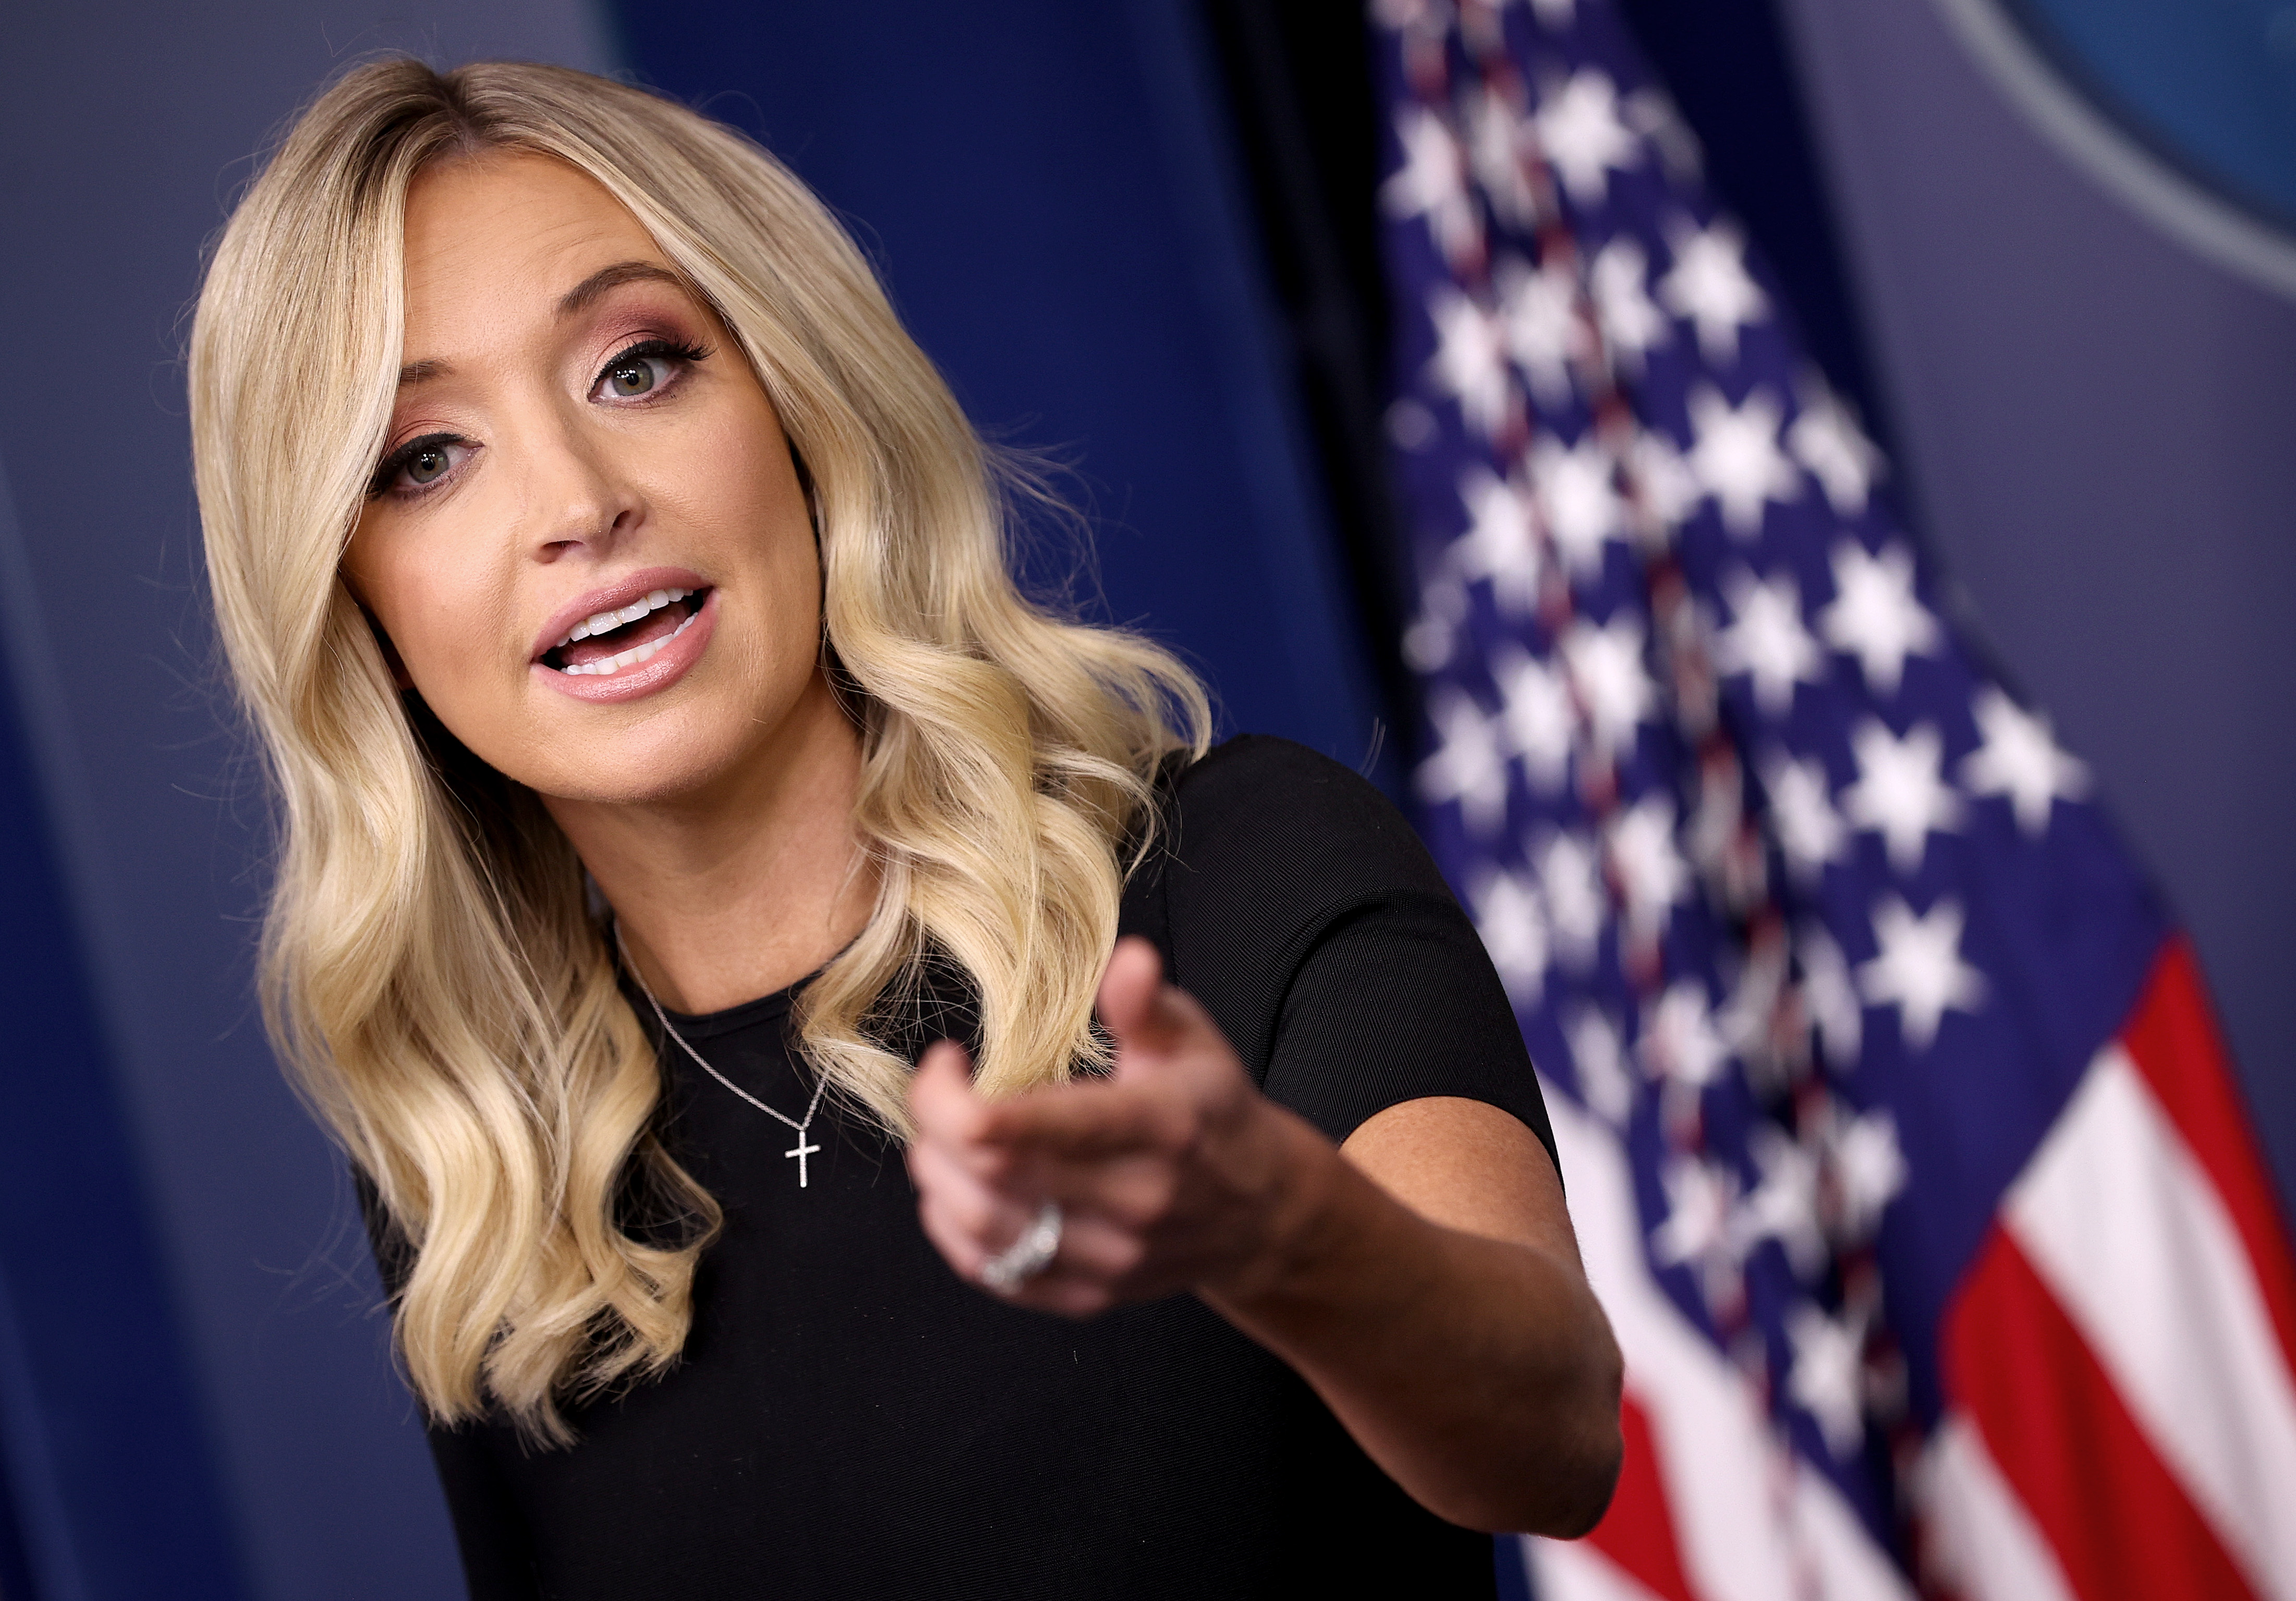 WASHINGTON, DC - MAY 26: White House press secretary Kayleigh McEnany answers questions during the daily briefing at the White House on May 26, 2020 in Washington, DC. McEnany answered a range of questions related primarily to the COVID-19 pandemic. (Photo by Win McNamee/Getty Images)